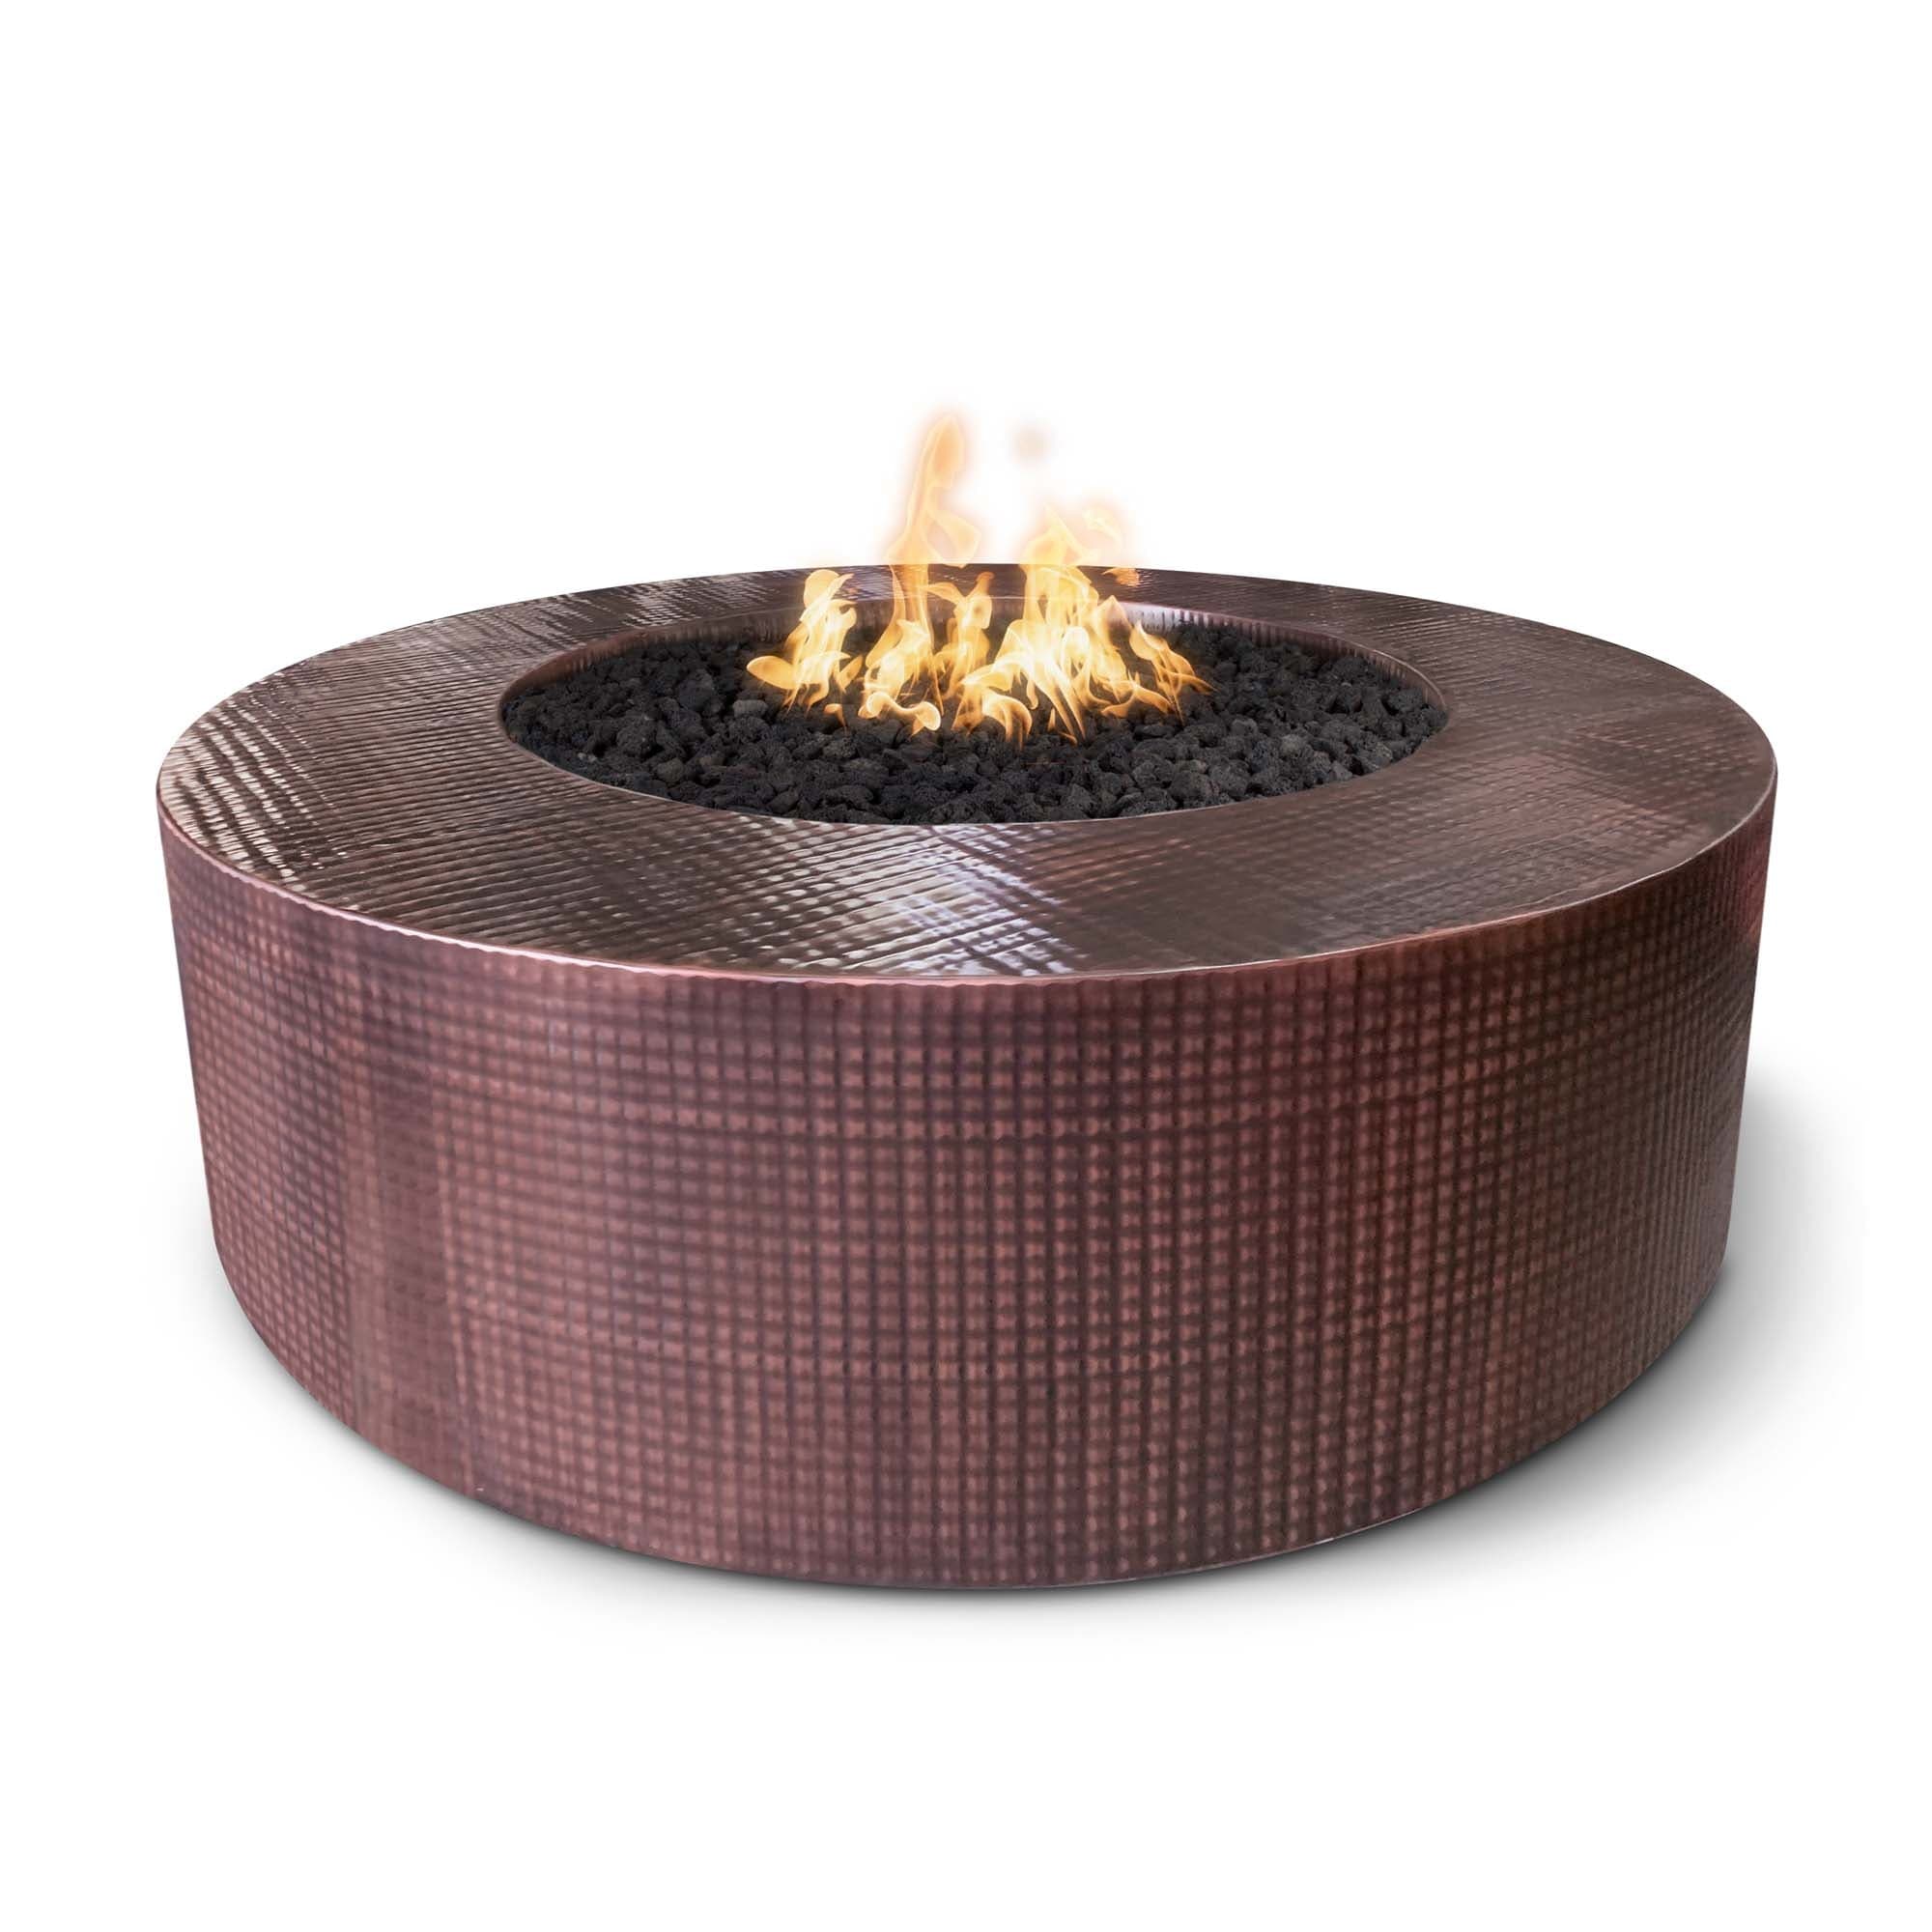 The Outdoor Plus Fire Pit 48" / Match Lit The Outdoor Plus Unity Fire Pit 24" Tall | Hammered Copper OPT-UNYCP48